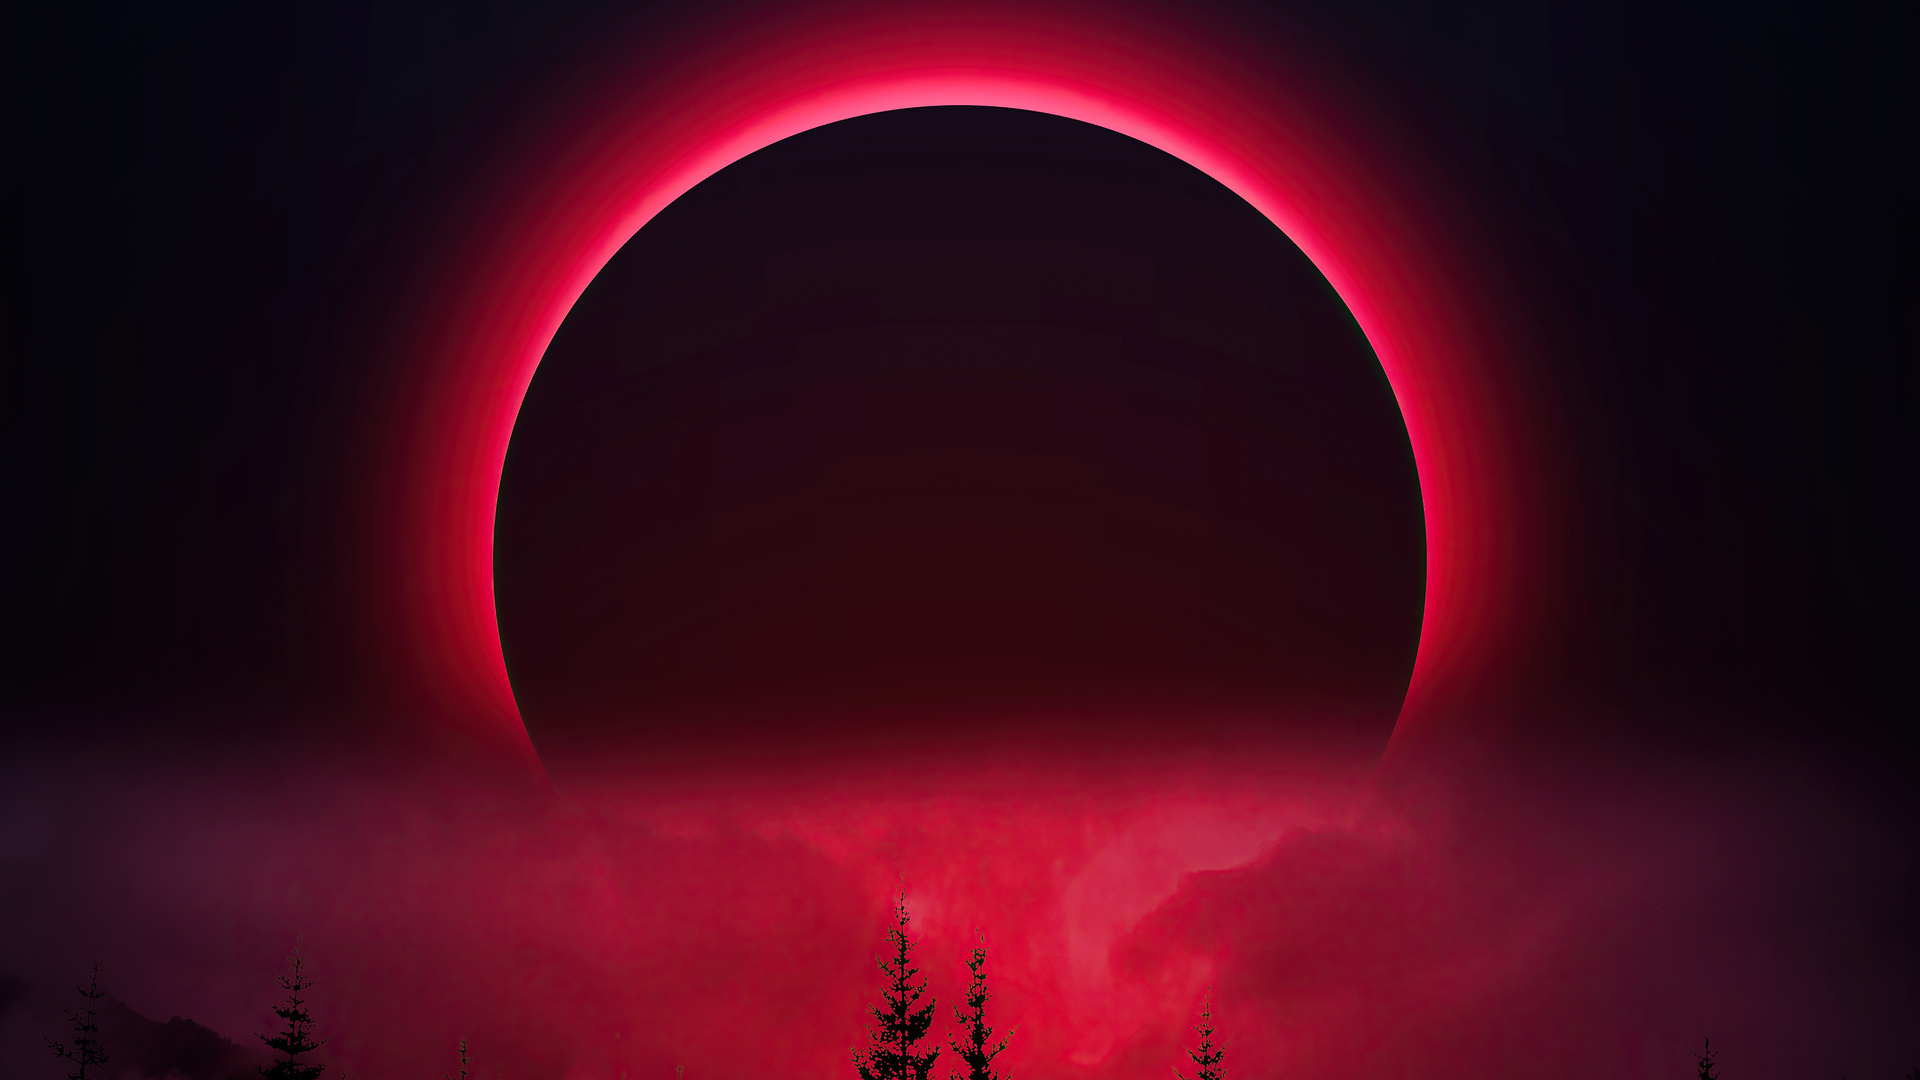 X red moon laptop full hd p hd k wallpapers images backgrounds photos and pictures